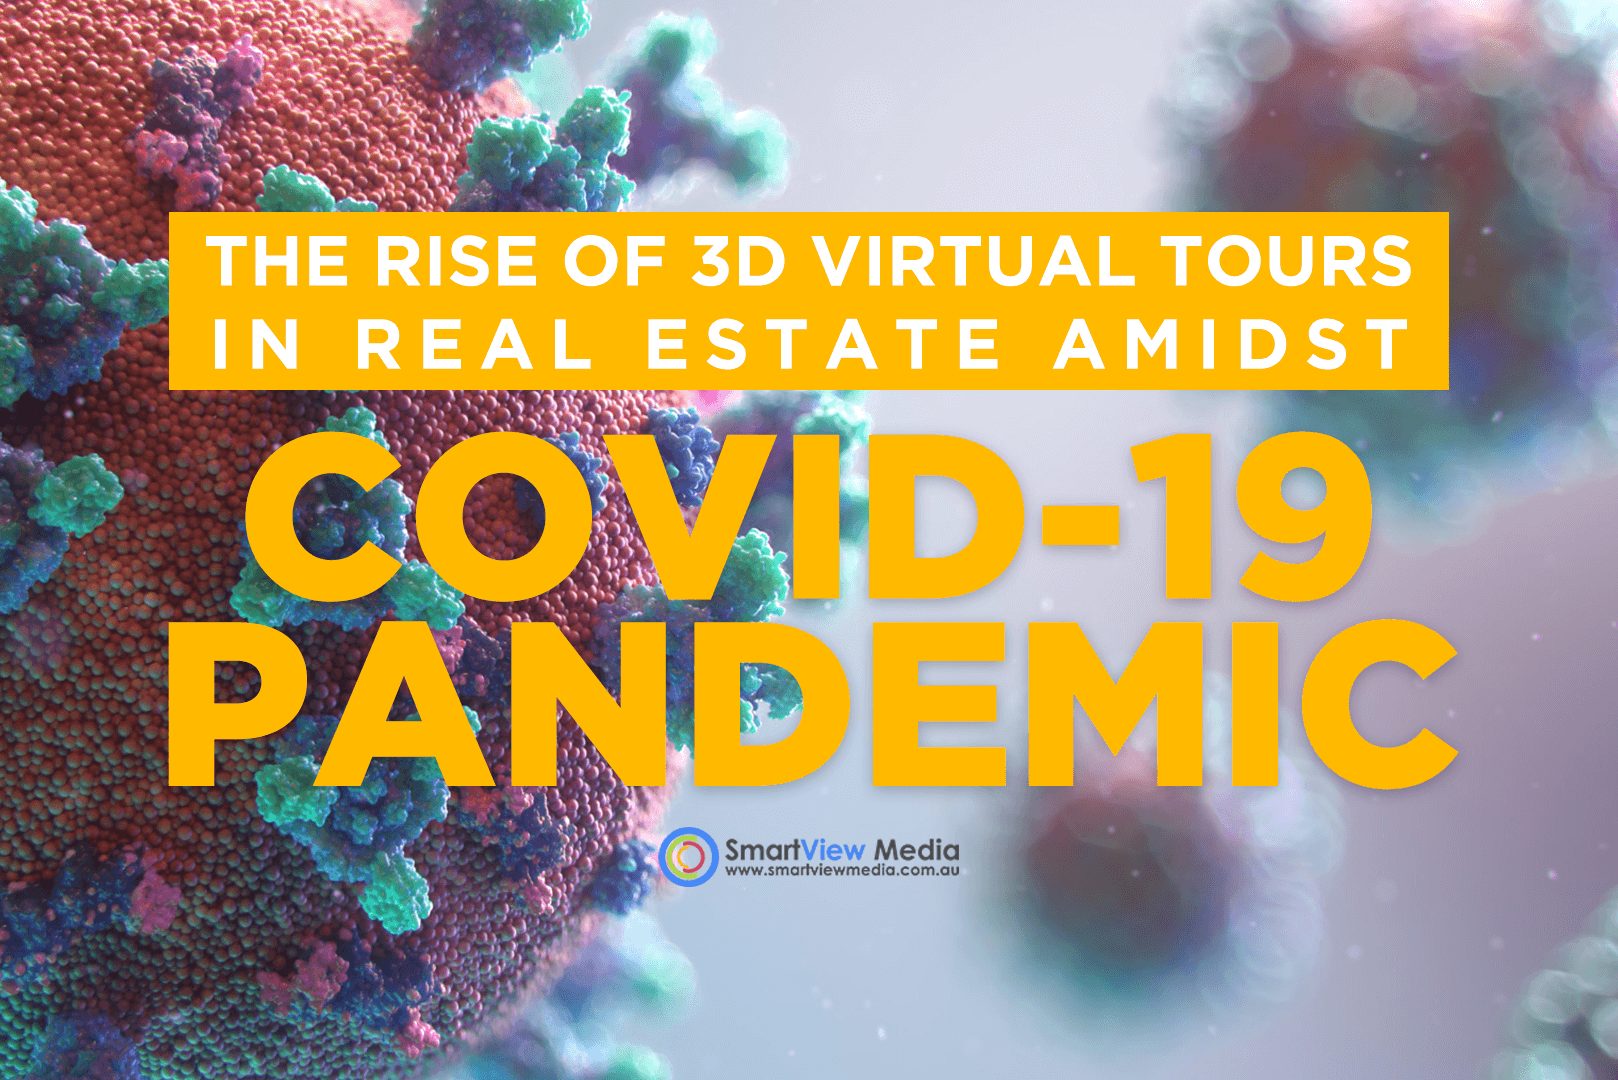 SmartView Media - The Rise of 3D Virtual Tours in Real Estate amidst COVID-19 Pandemic